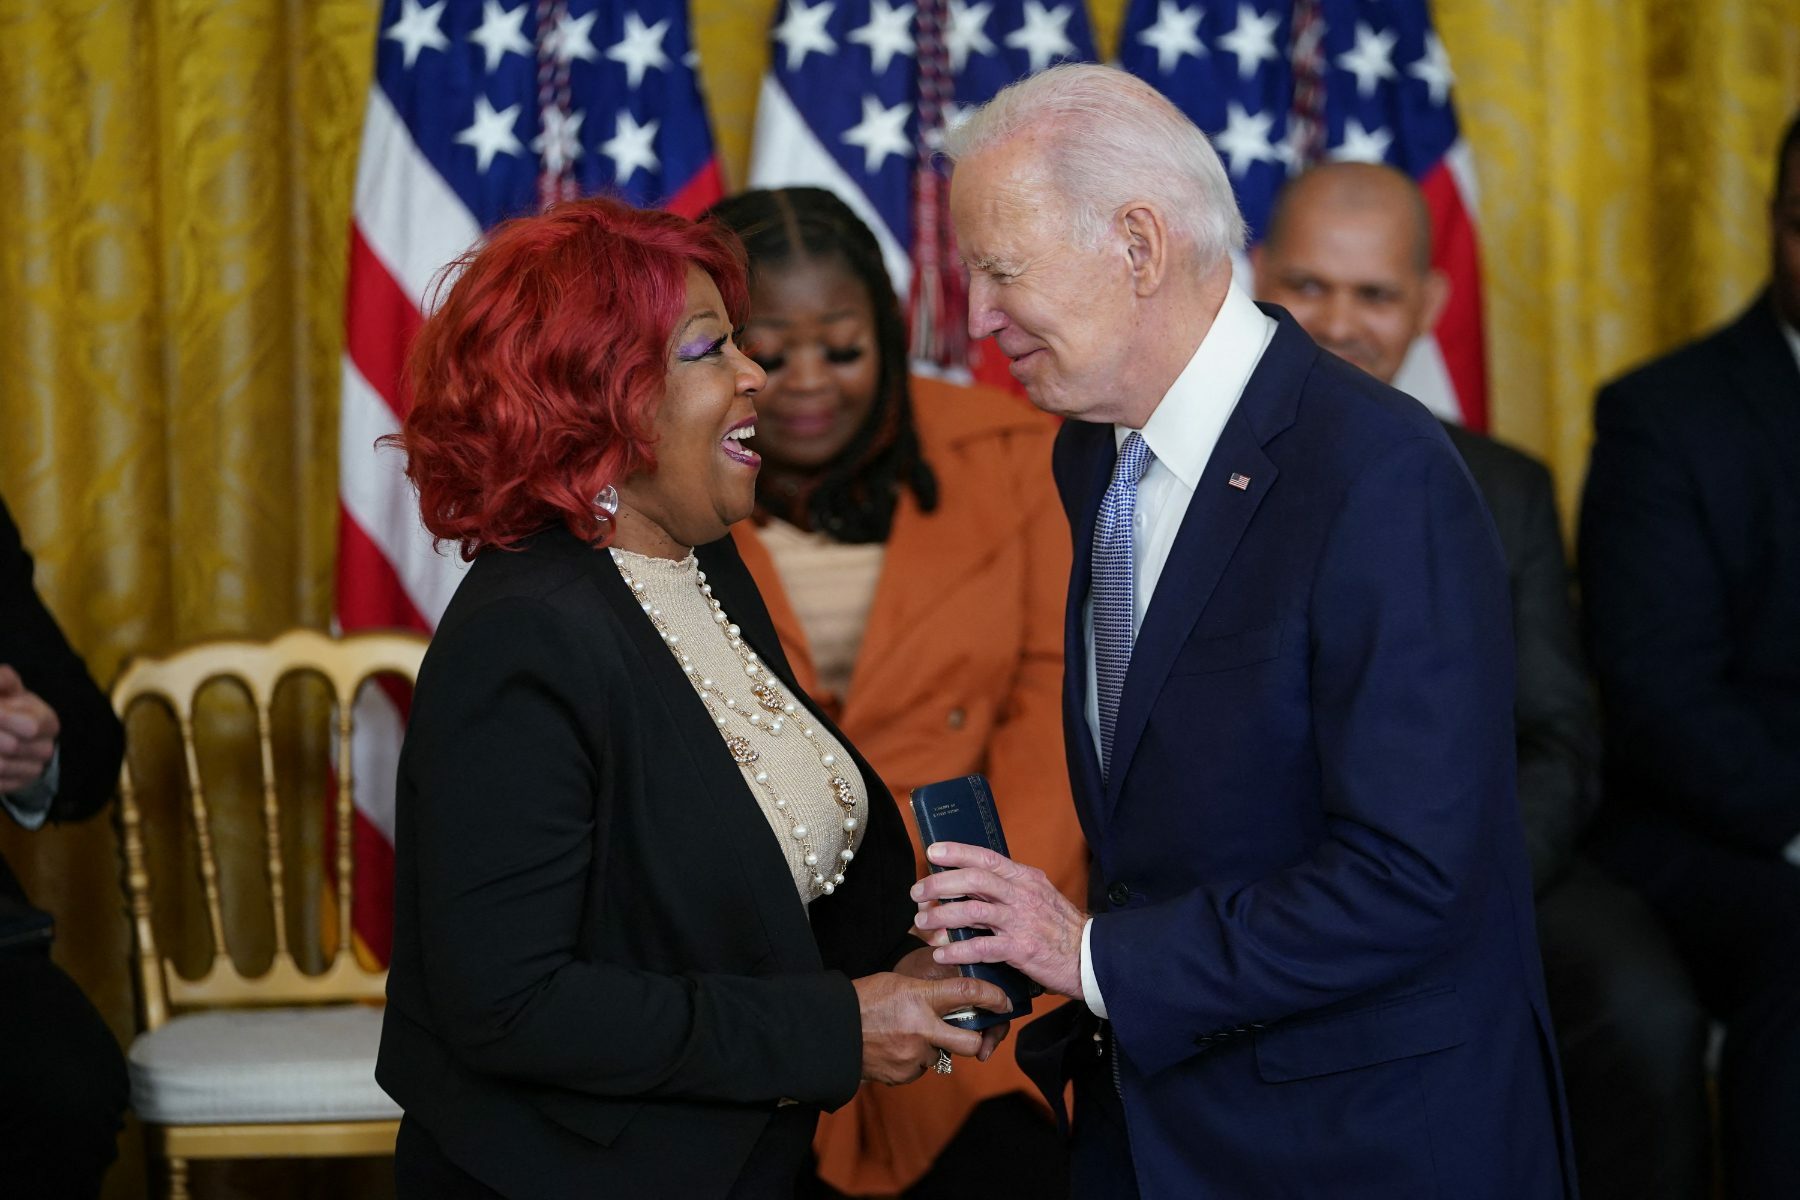 Ruby Freeman, election worker from Fulton County, Ga., receives the President Citizens Medal from President Joe Biden for her work upholding the 2020 presidential election